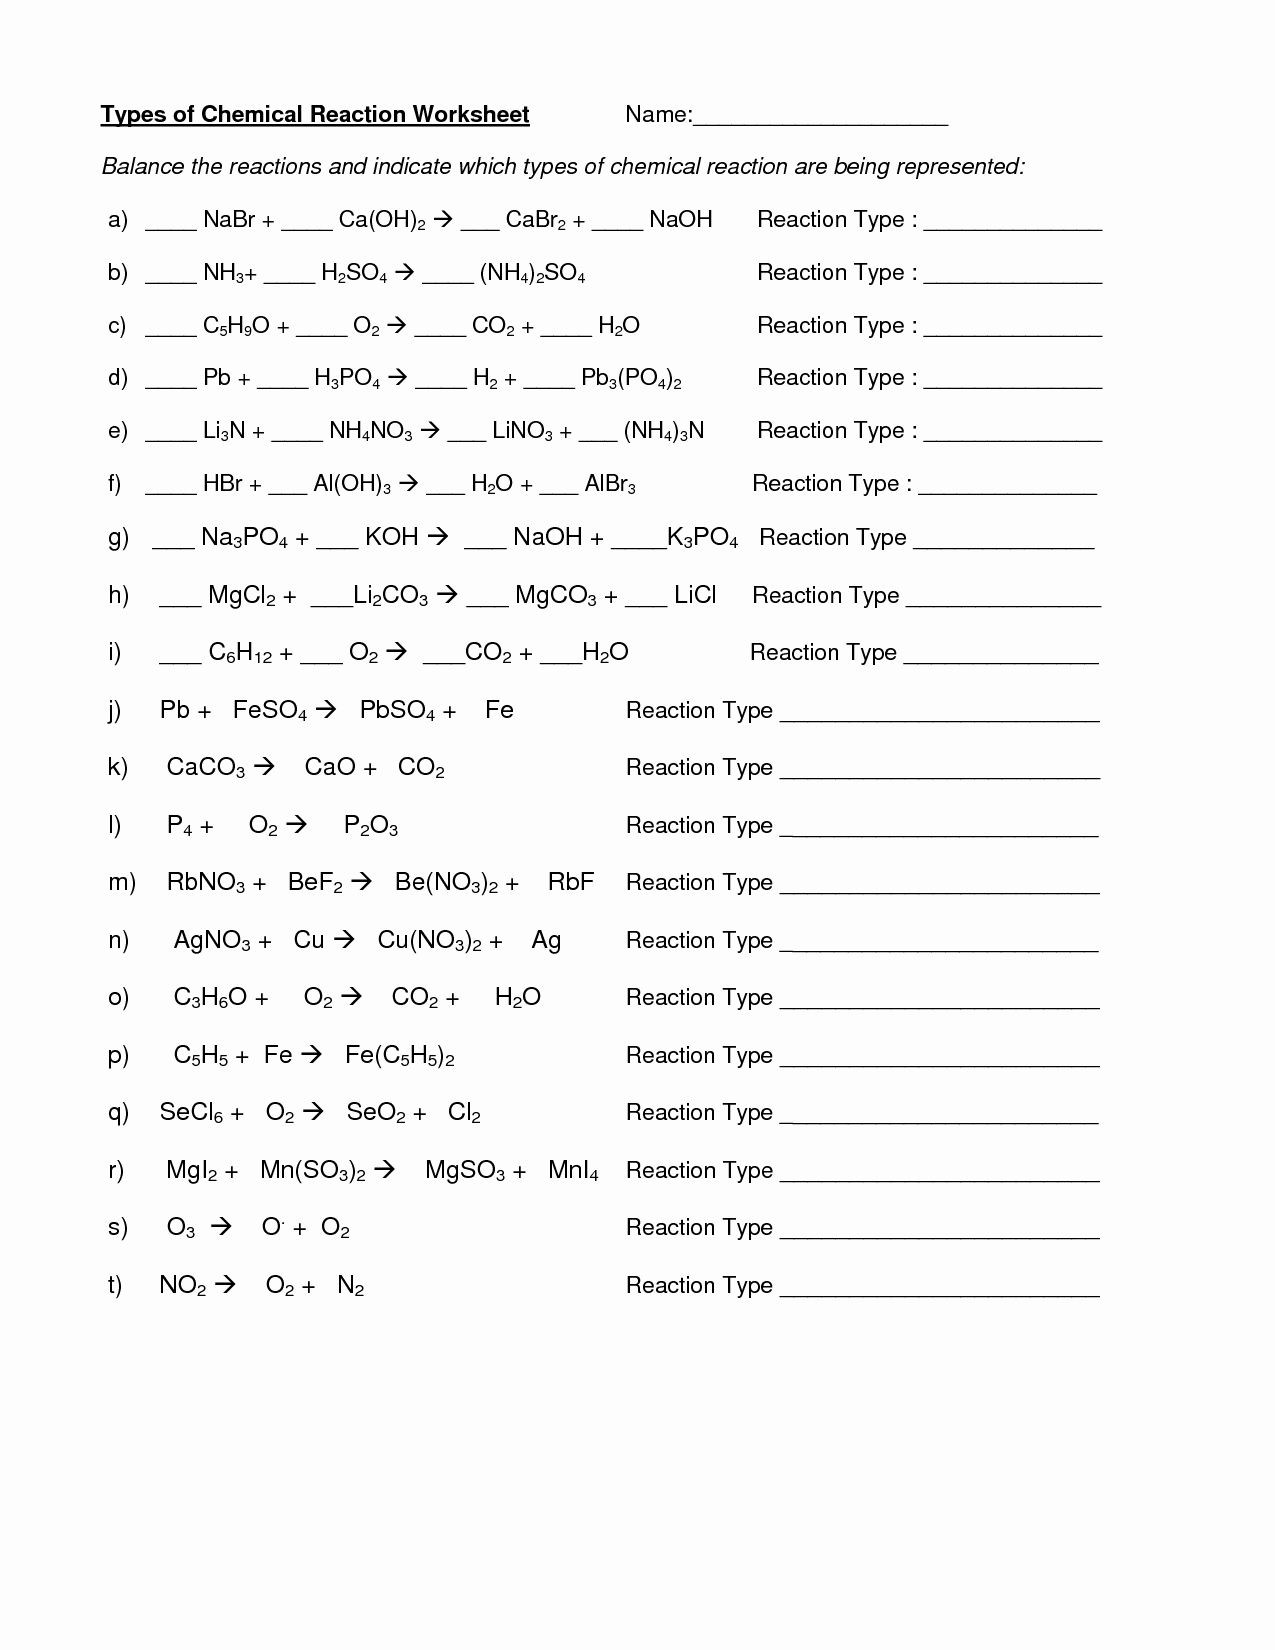 Types Of Reactions Worksheet Answers 50 Classifying Chemical Reactions Worksheet Answers In 2020